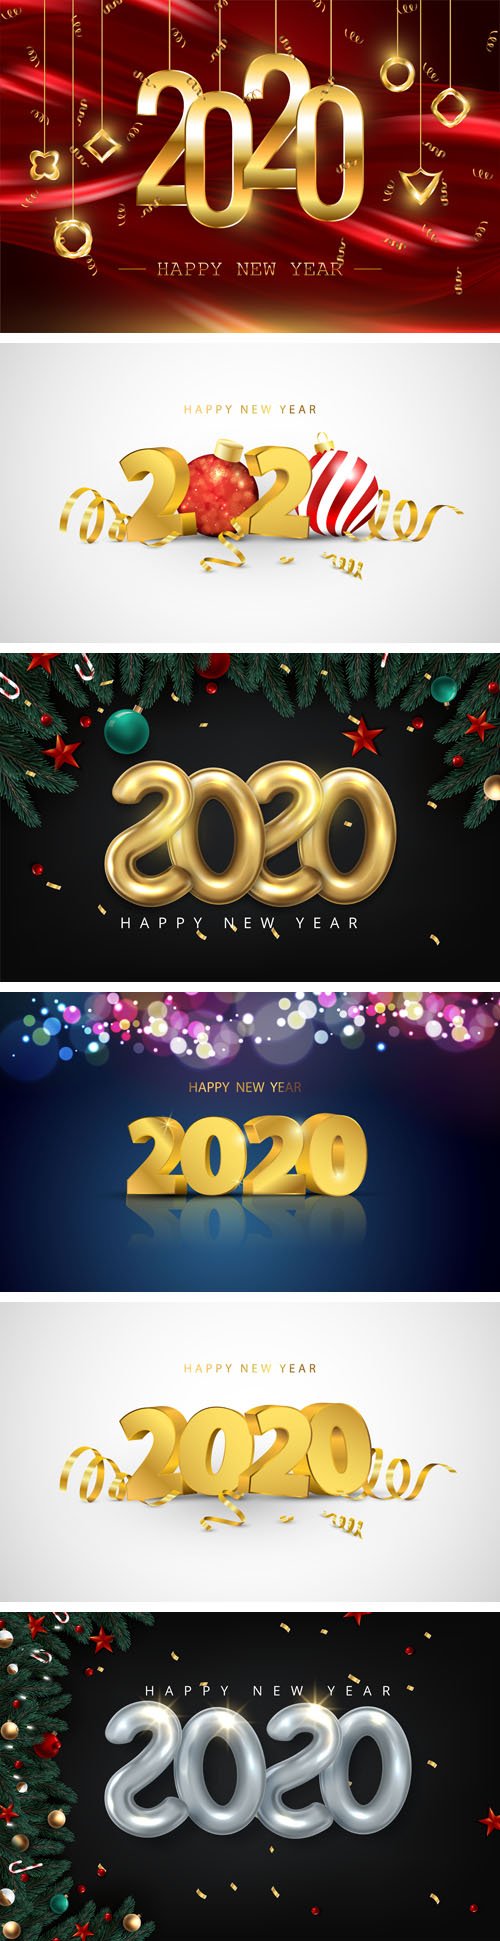 Happy New Year 2020 Vector Collection 1